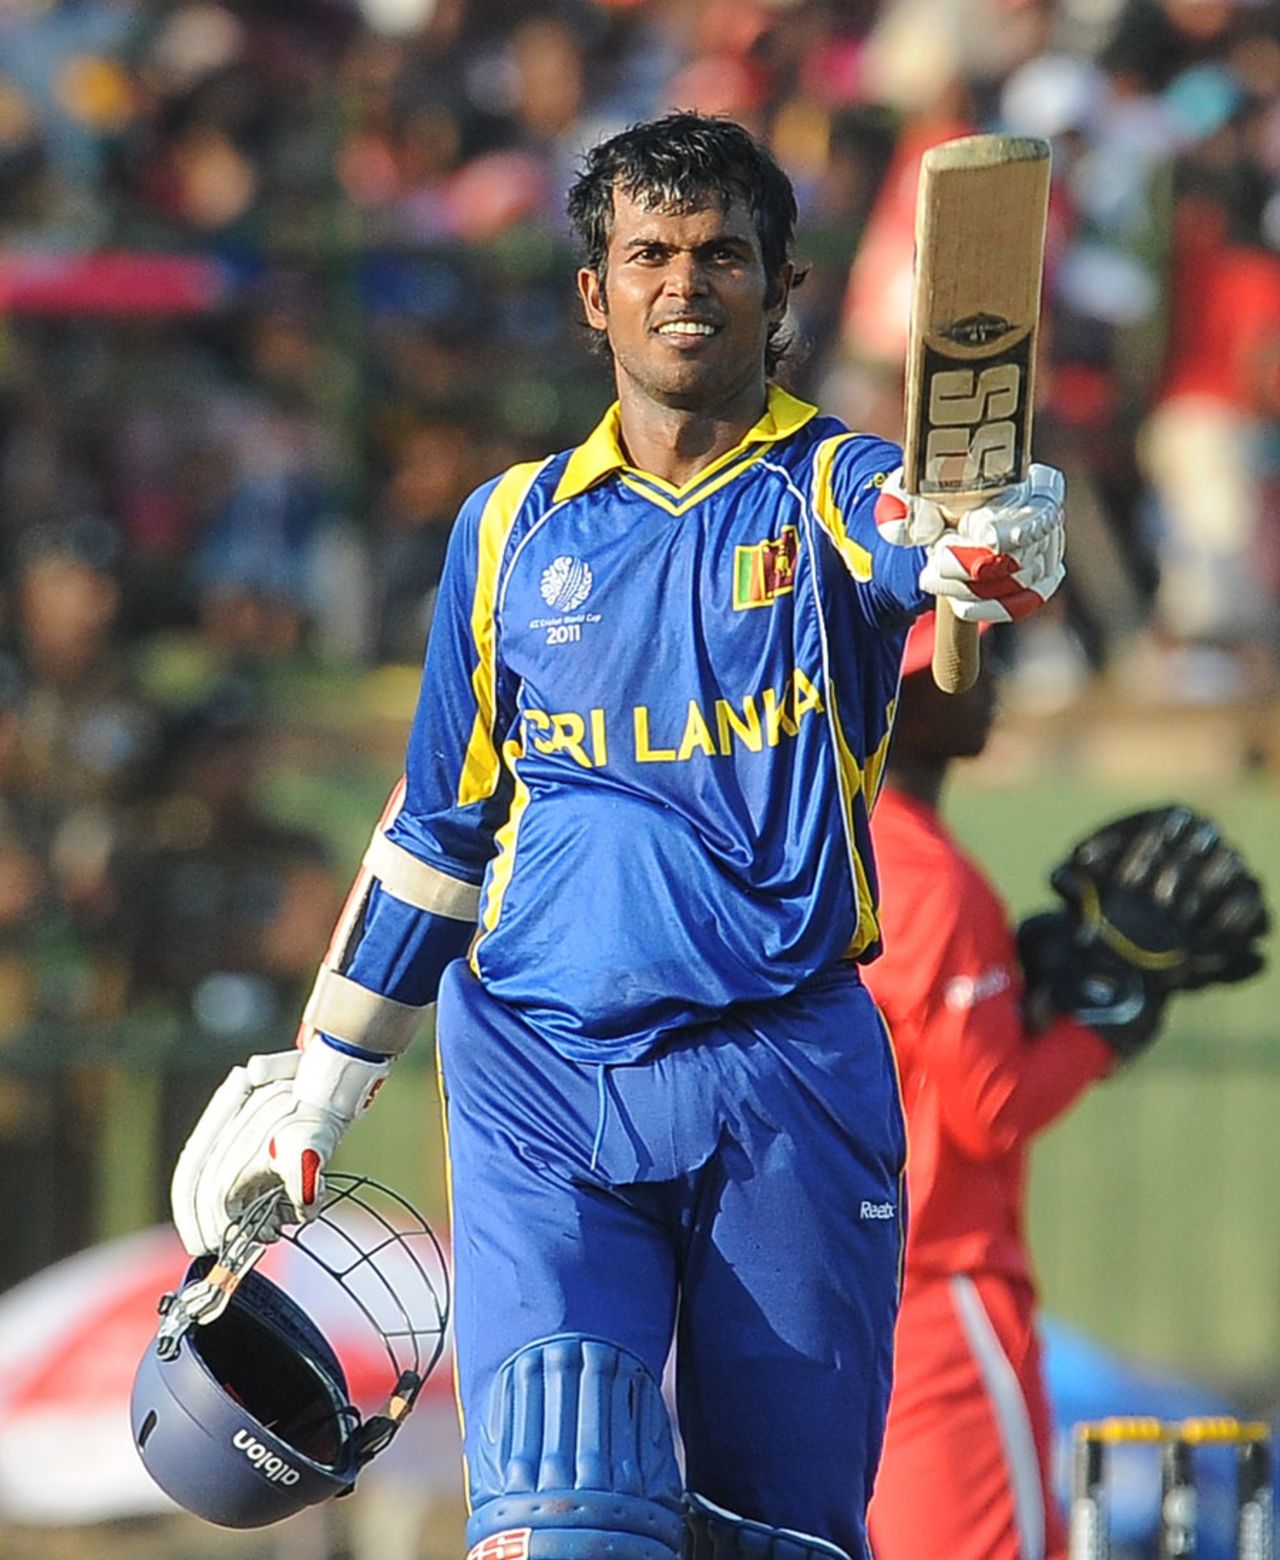 Upul Tharanga acknowledges the cheers after getting to a hundred, Sri Lanka v Zimbabwe, Group A, World Cup, Pallekele, March 10, 2011